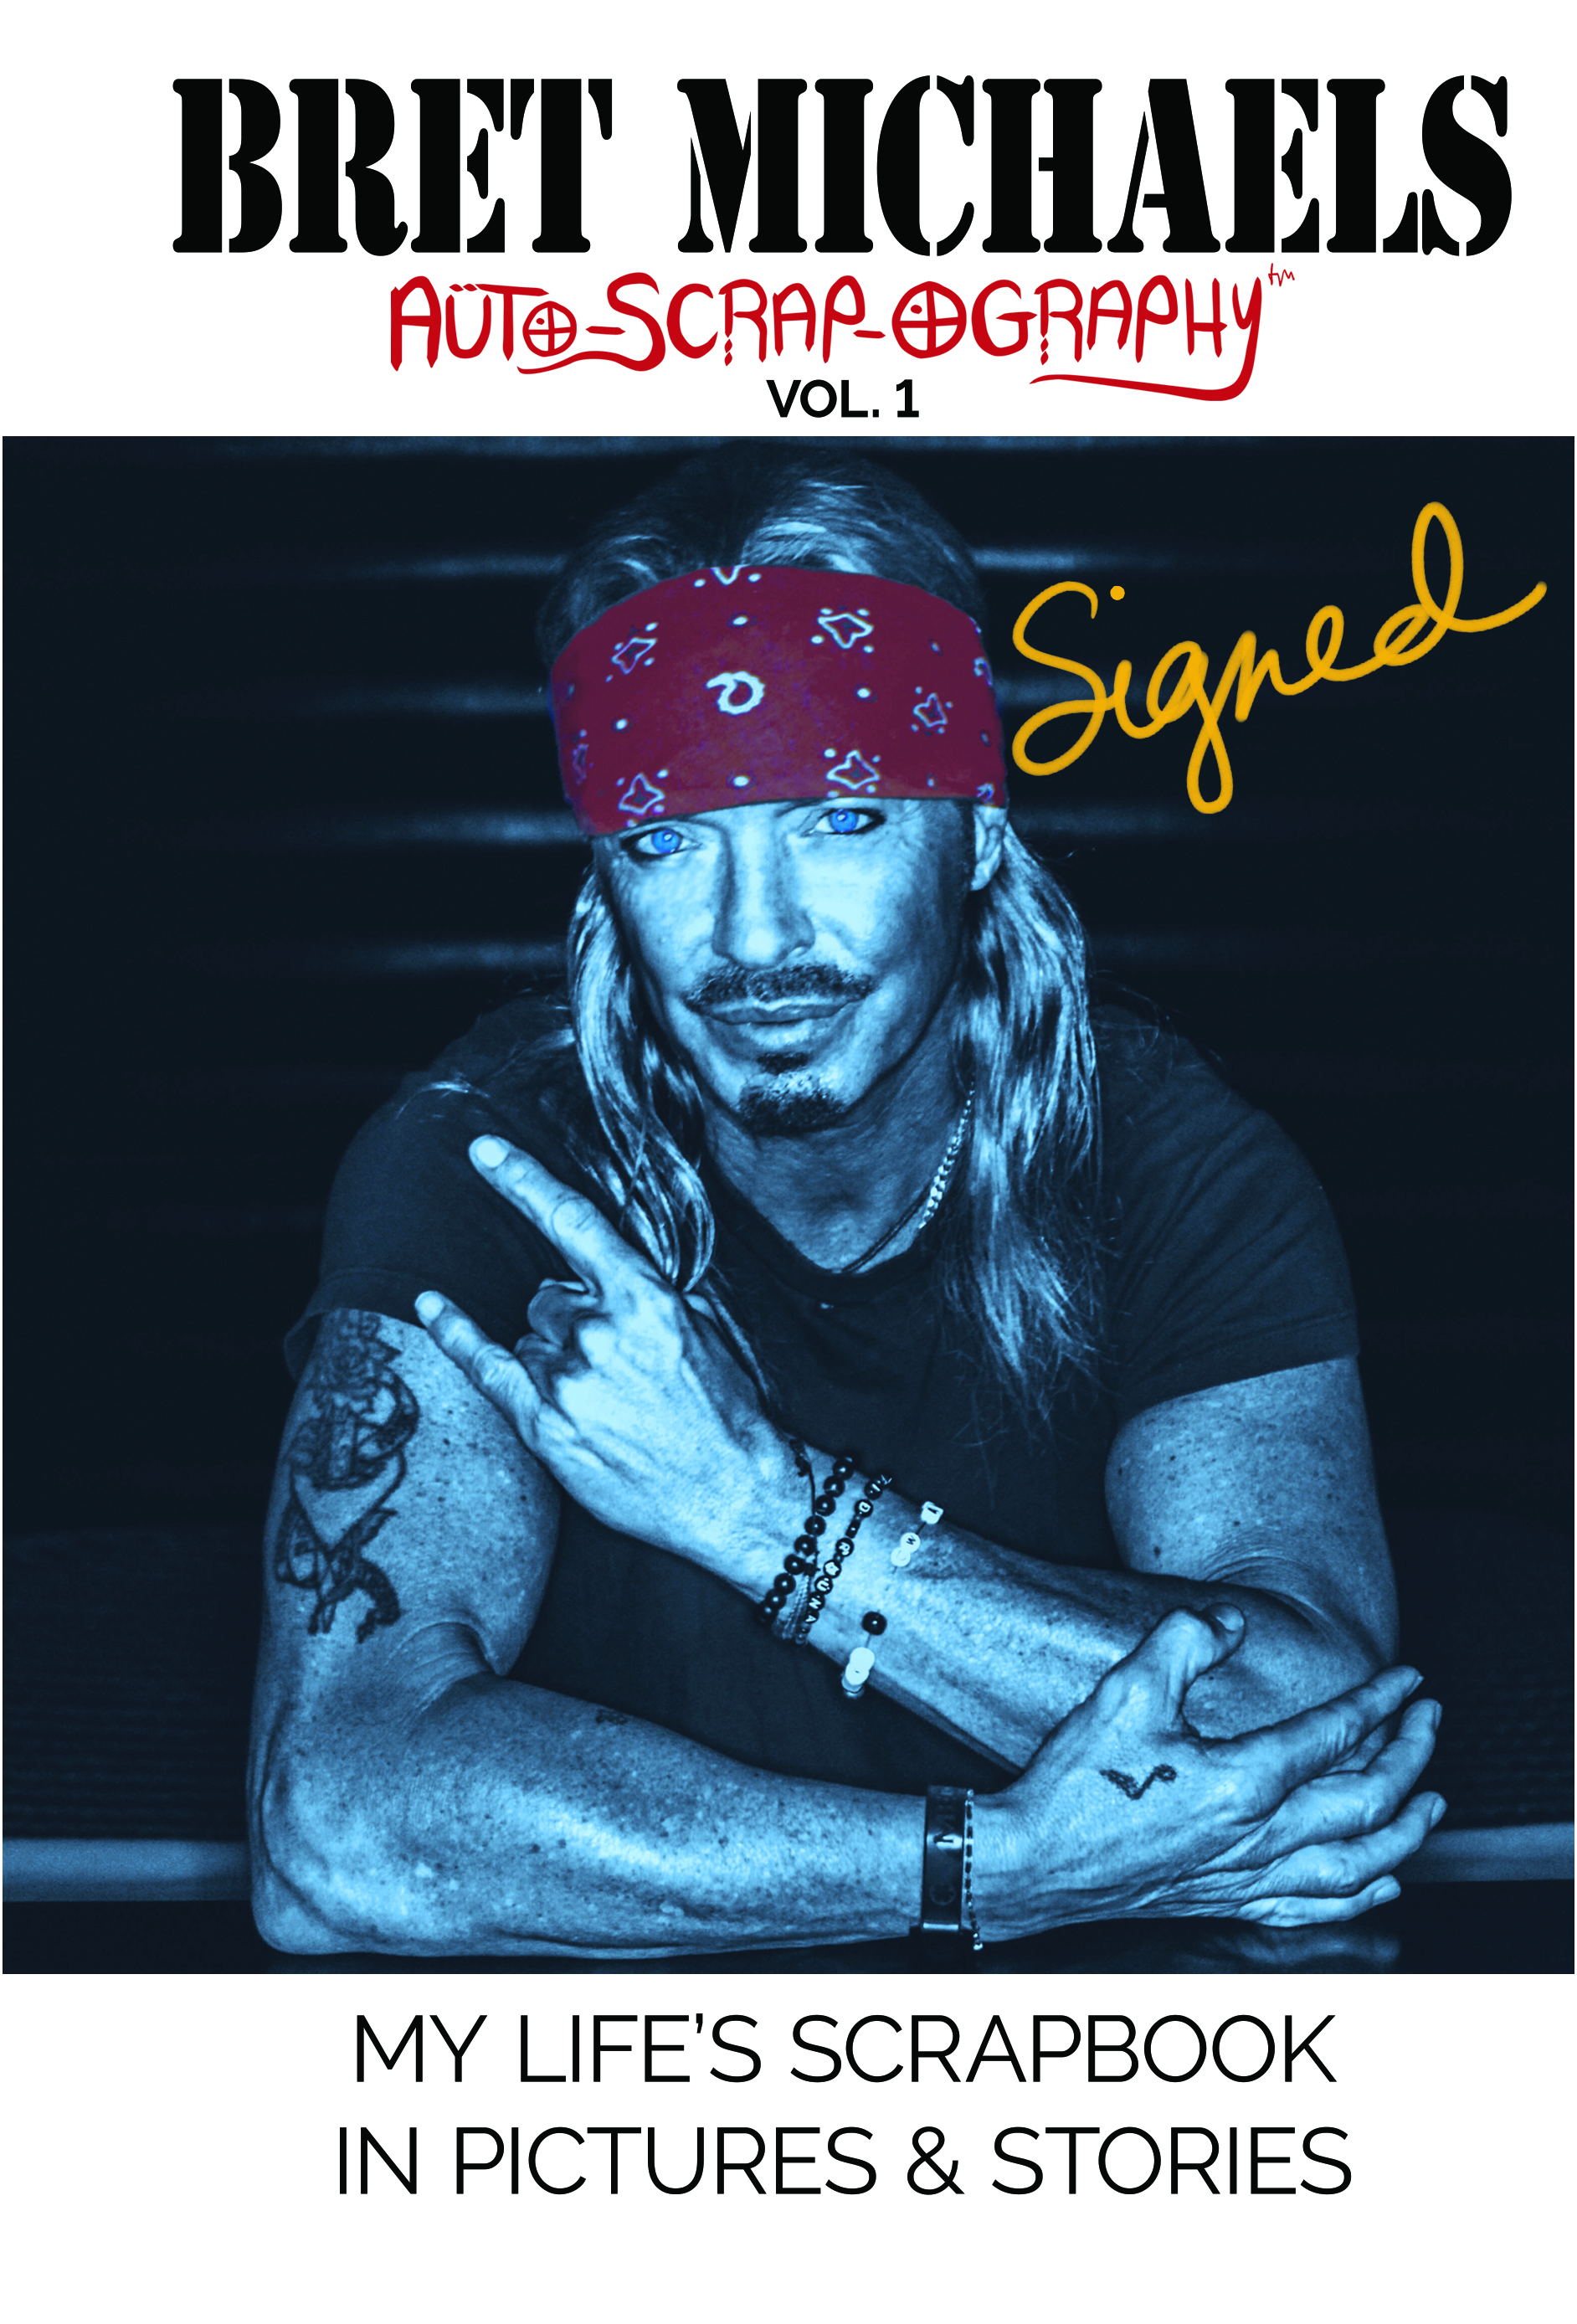 SIGNED HARDCOVER Bret Michaels Auto-scrap-ography My Life's Scrapbook in Pictures and Stories  Hardcover, Bret Michaels, Brett Michaels, Bret Micheals, Brett Micheals, Book, Autobiography, pictures and stories, auto-scrap-ography, autoscrapography